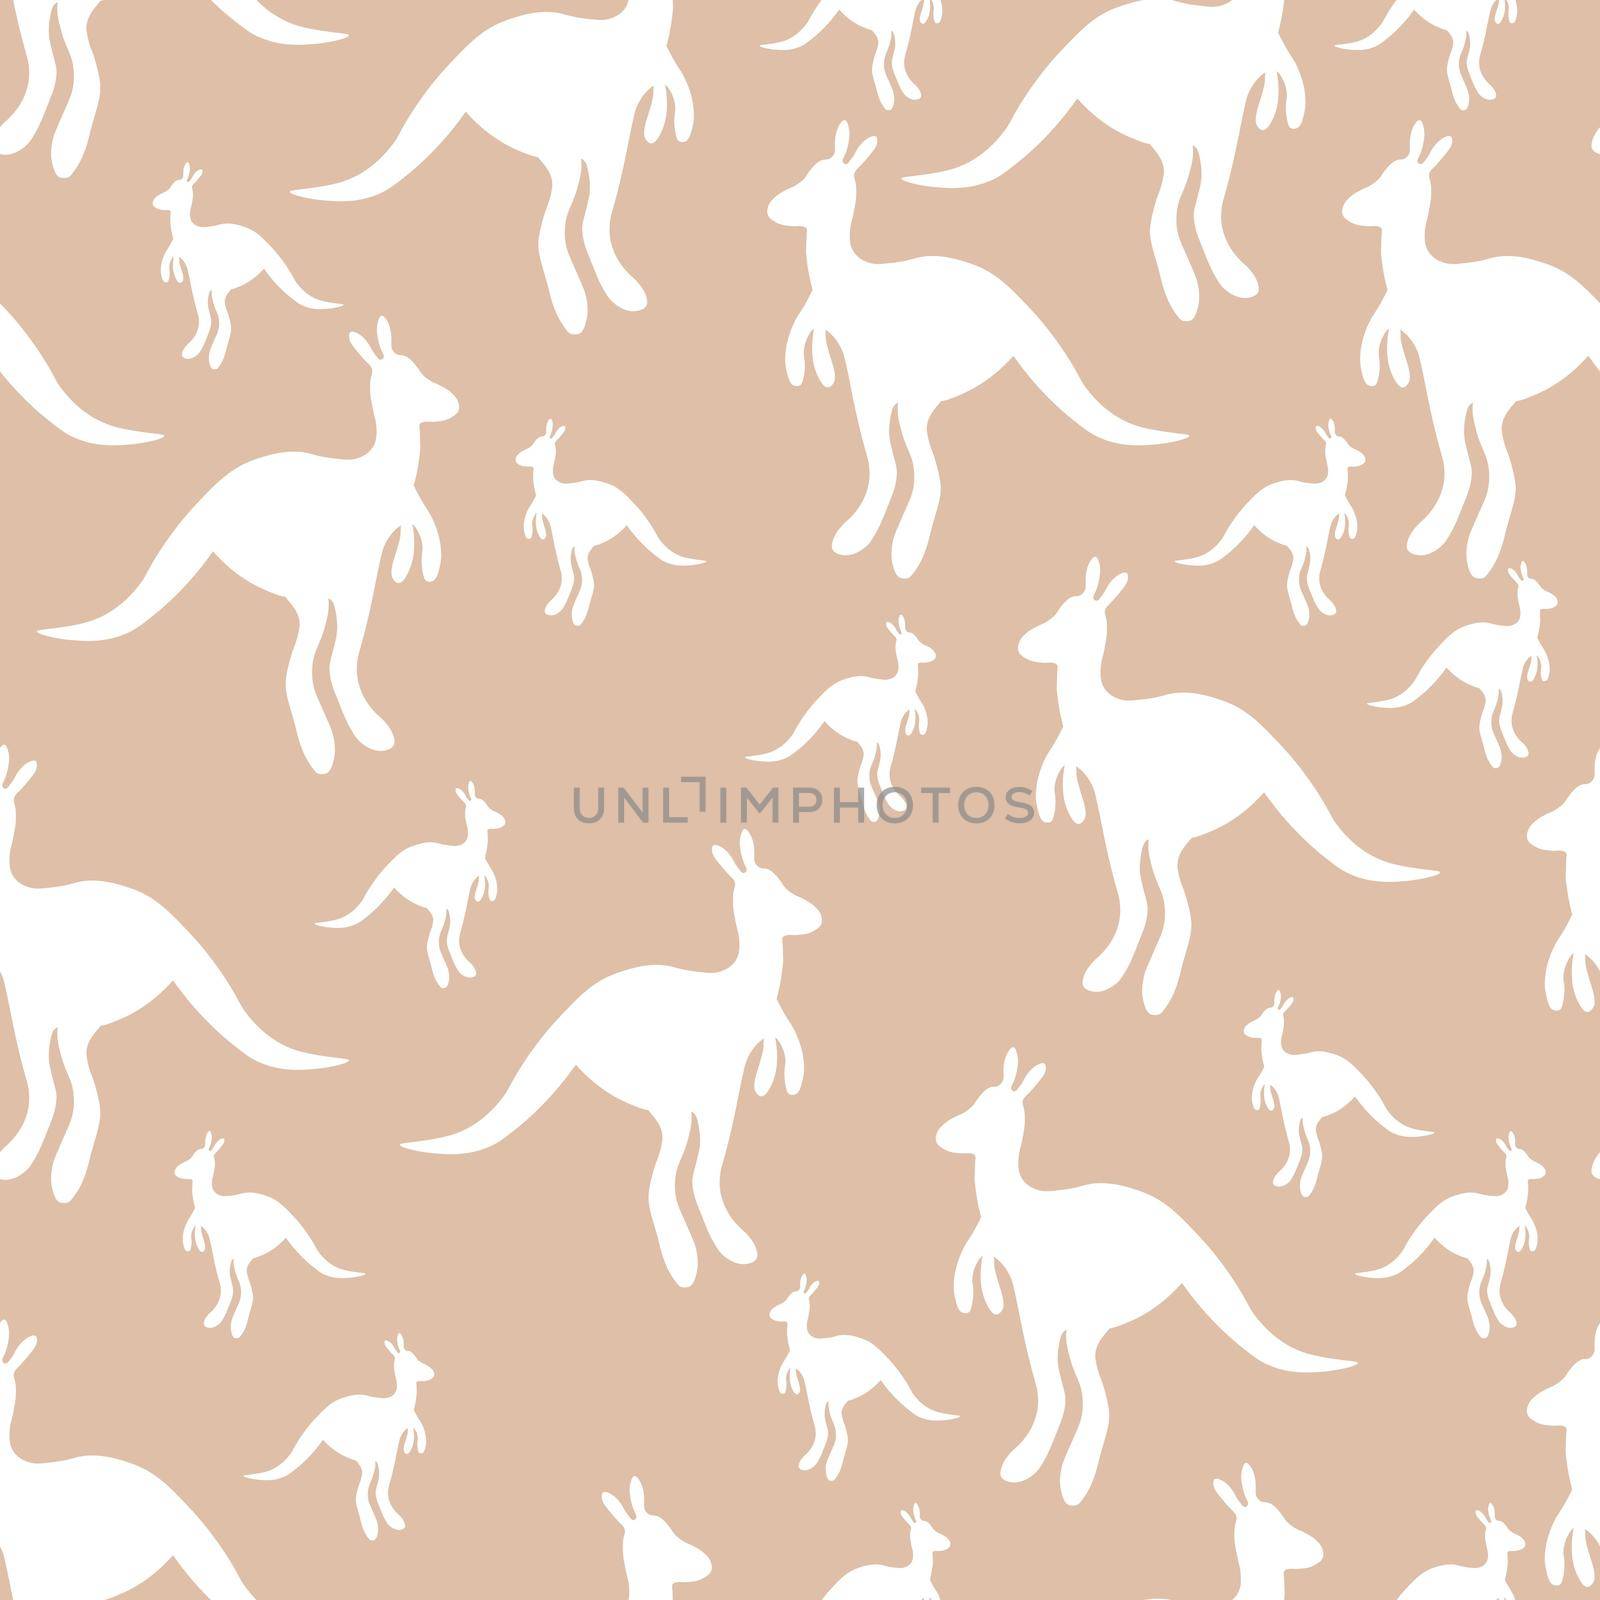 Vector flat illustration with silhouette kangaroo and baby kangaroo on fiery background. Seamless pattern on beige background. Design for card, poster, fabric, textile. Pray for Australia and animals.